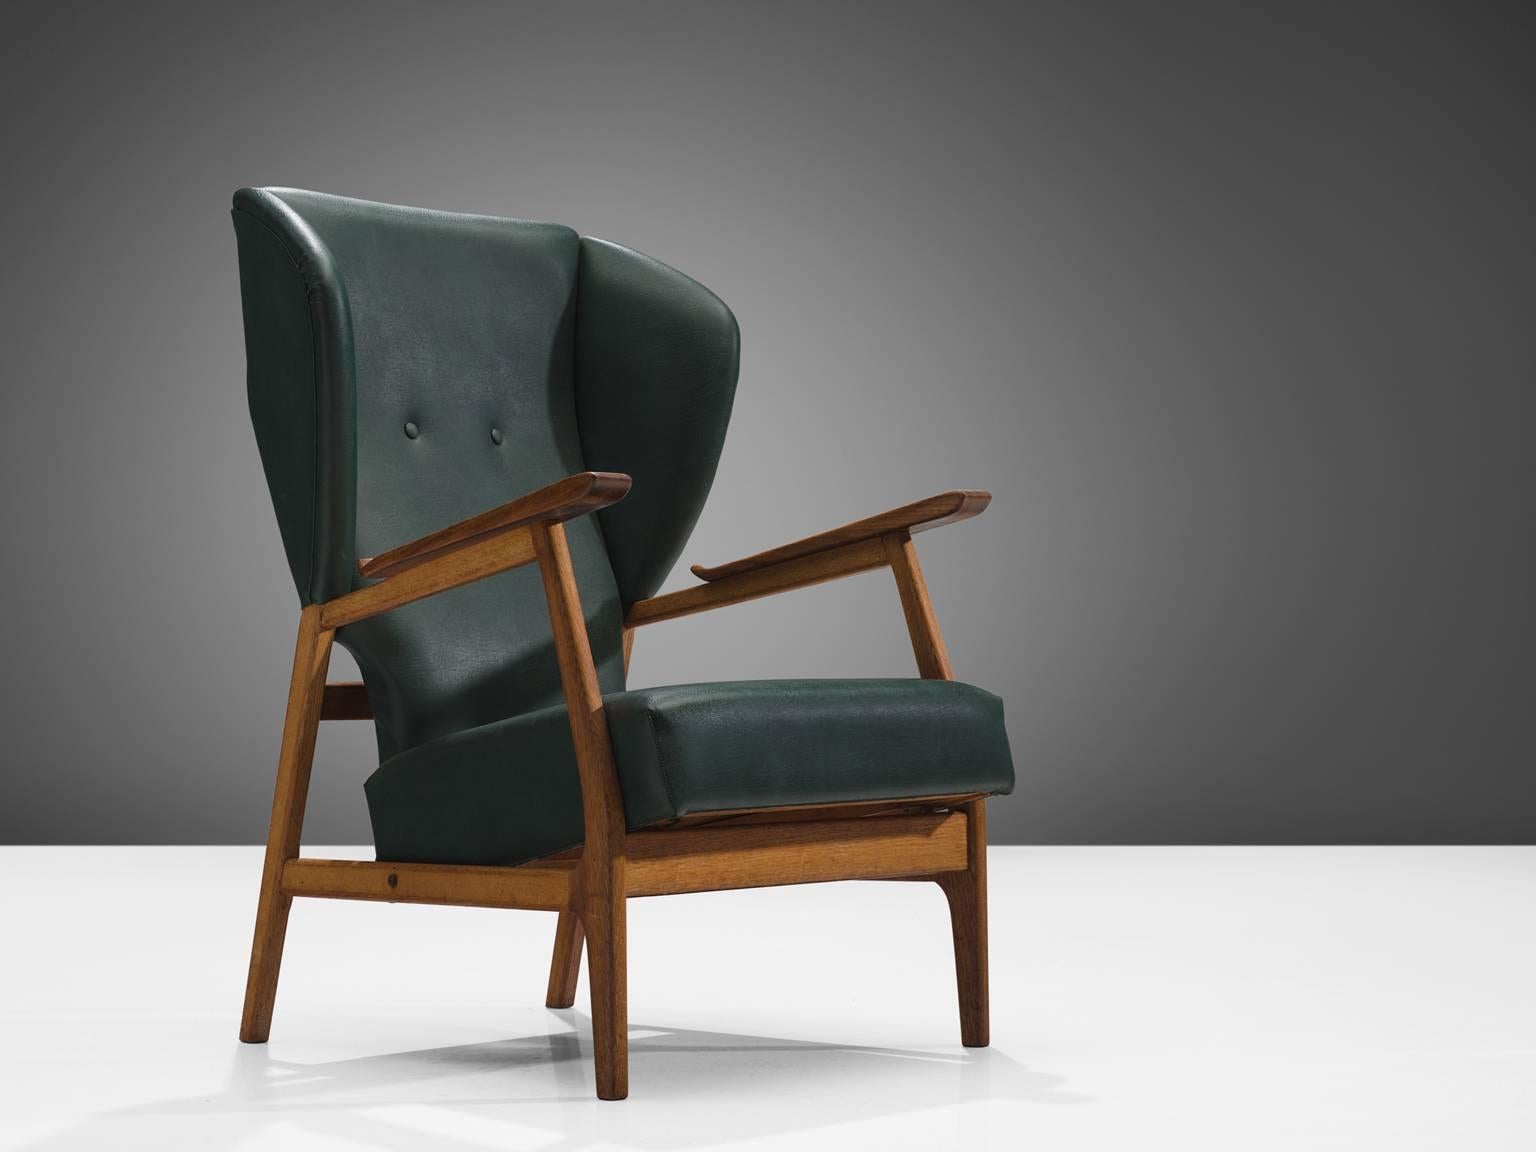 Lounge chair, in teak and green faux-leather, Scandinavia, 1960s.

This wingback armchair features the style of Aksel Bender Madsen. This chair has a teak frame, which has a nice open character. The wingback is wide en emphasizes the comfortable